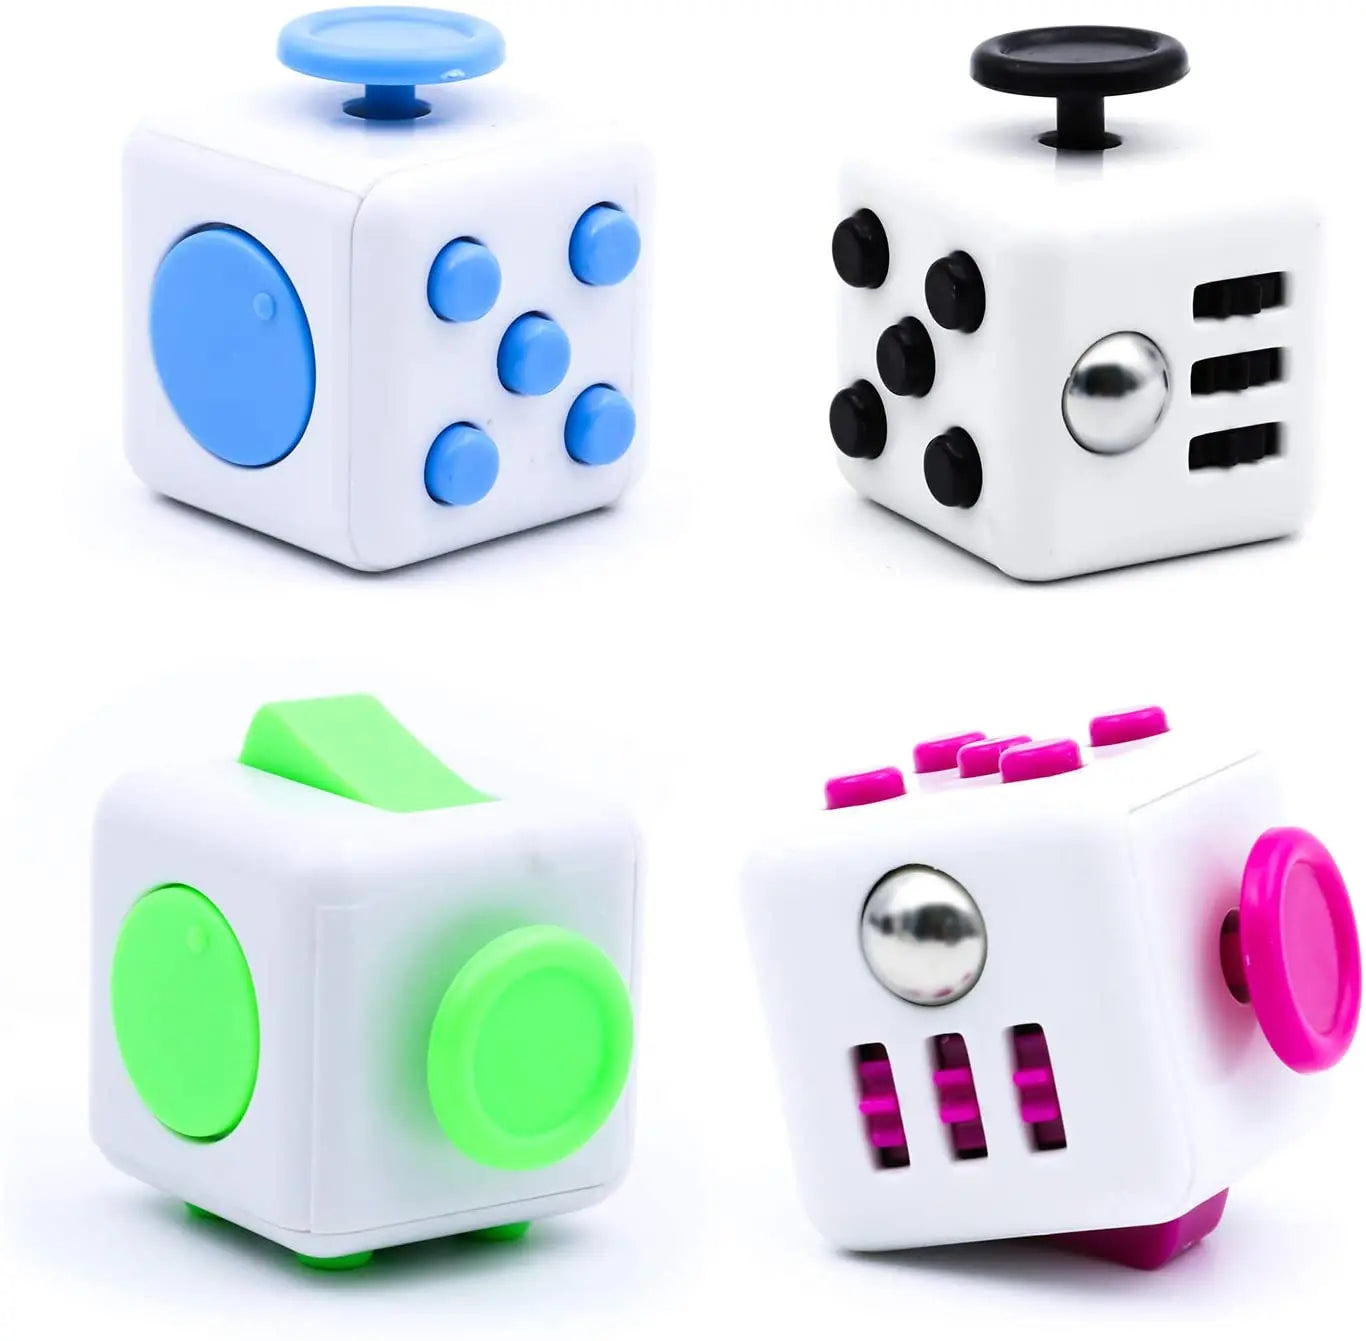 Reduce Stress with Our Fidget Dice - Perfect for Adults & Kids - Fast Shipping!